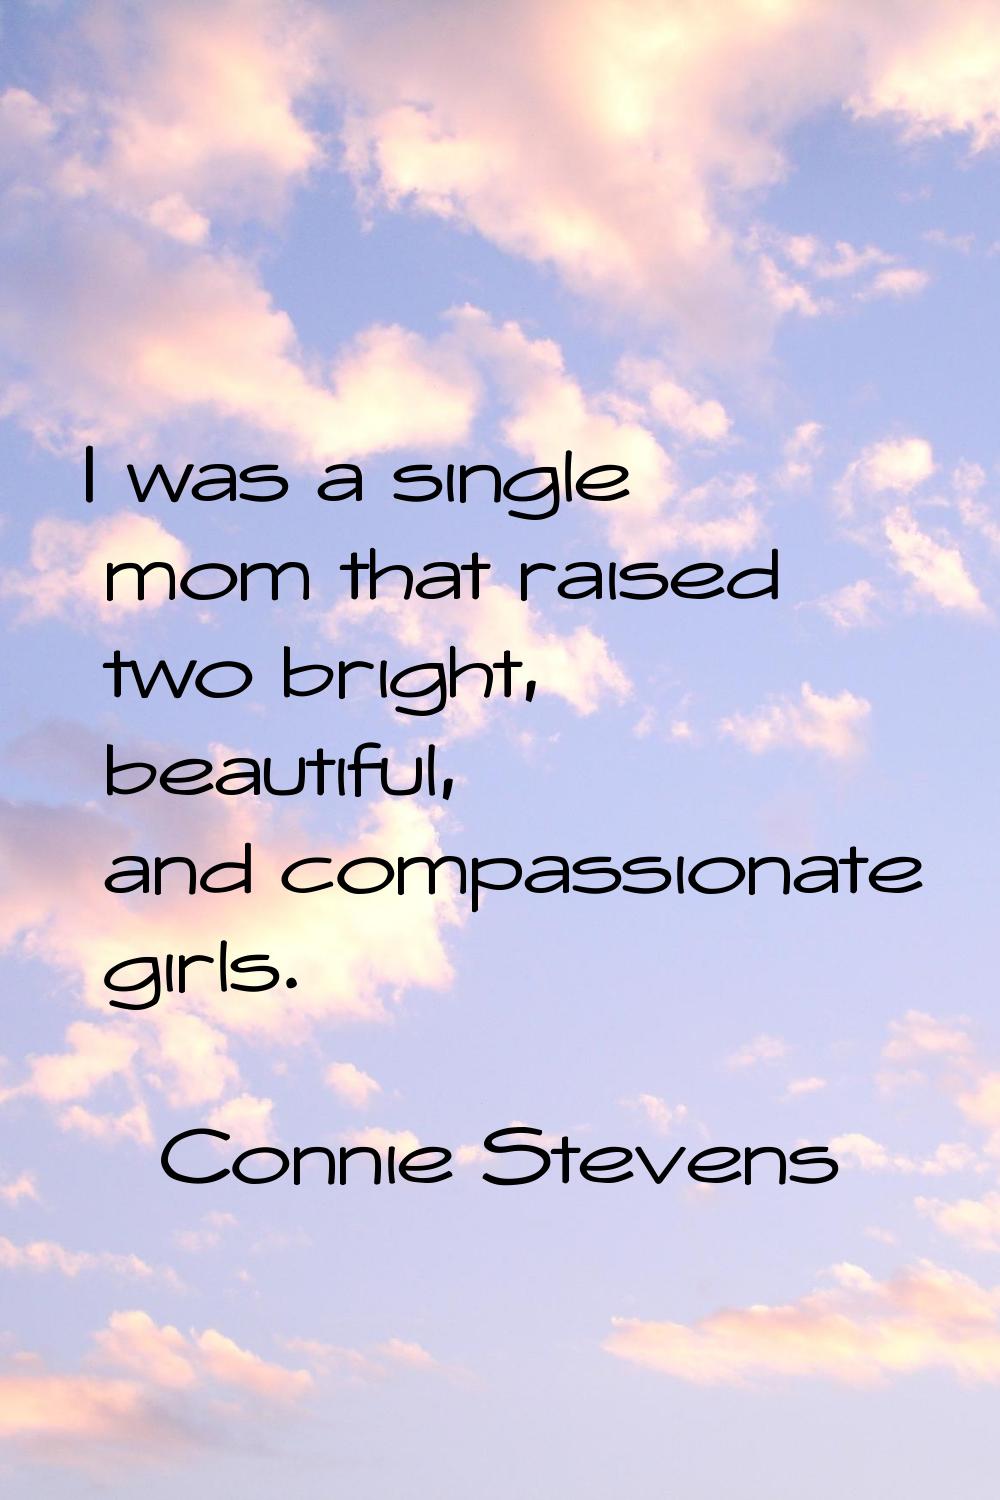 I was a single mom that raised two bright, beautiful, and compassionate girls.